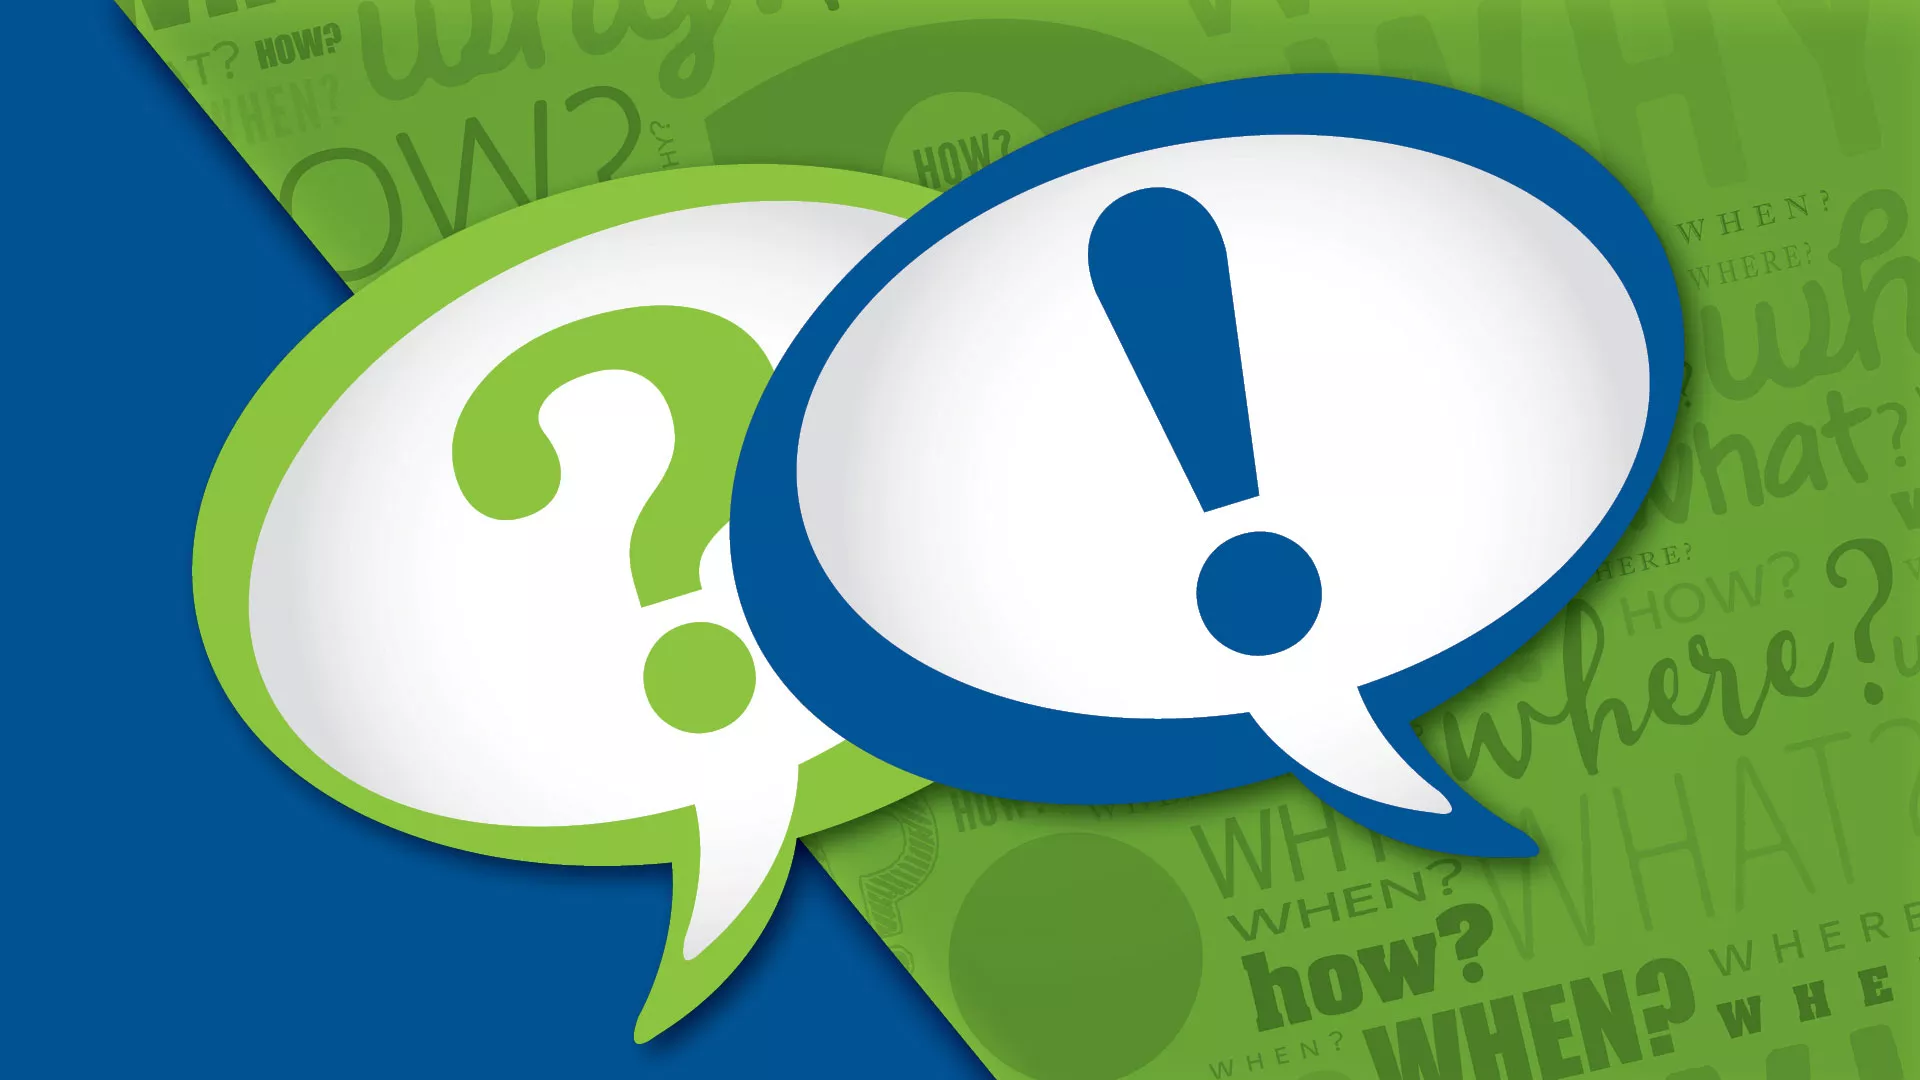 Question mark and exclamation mark in speech bubble